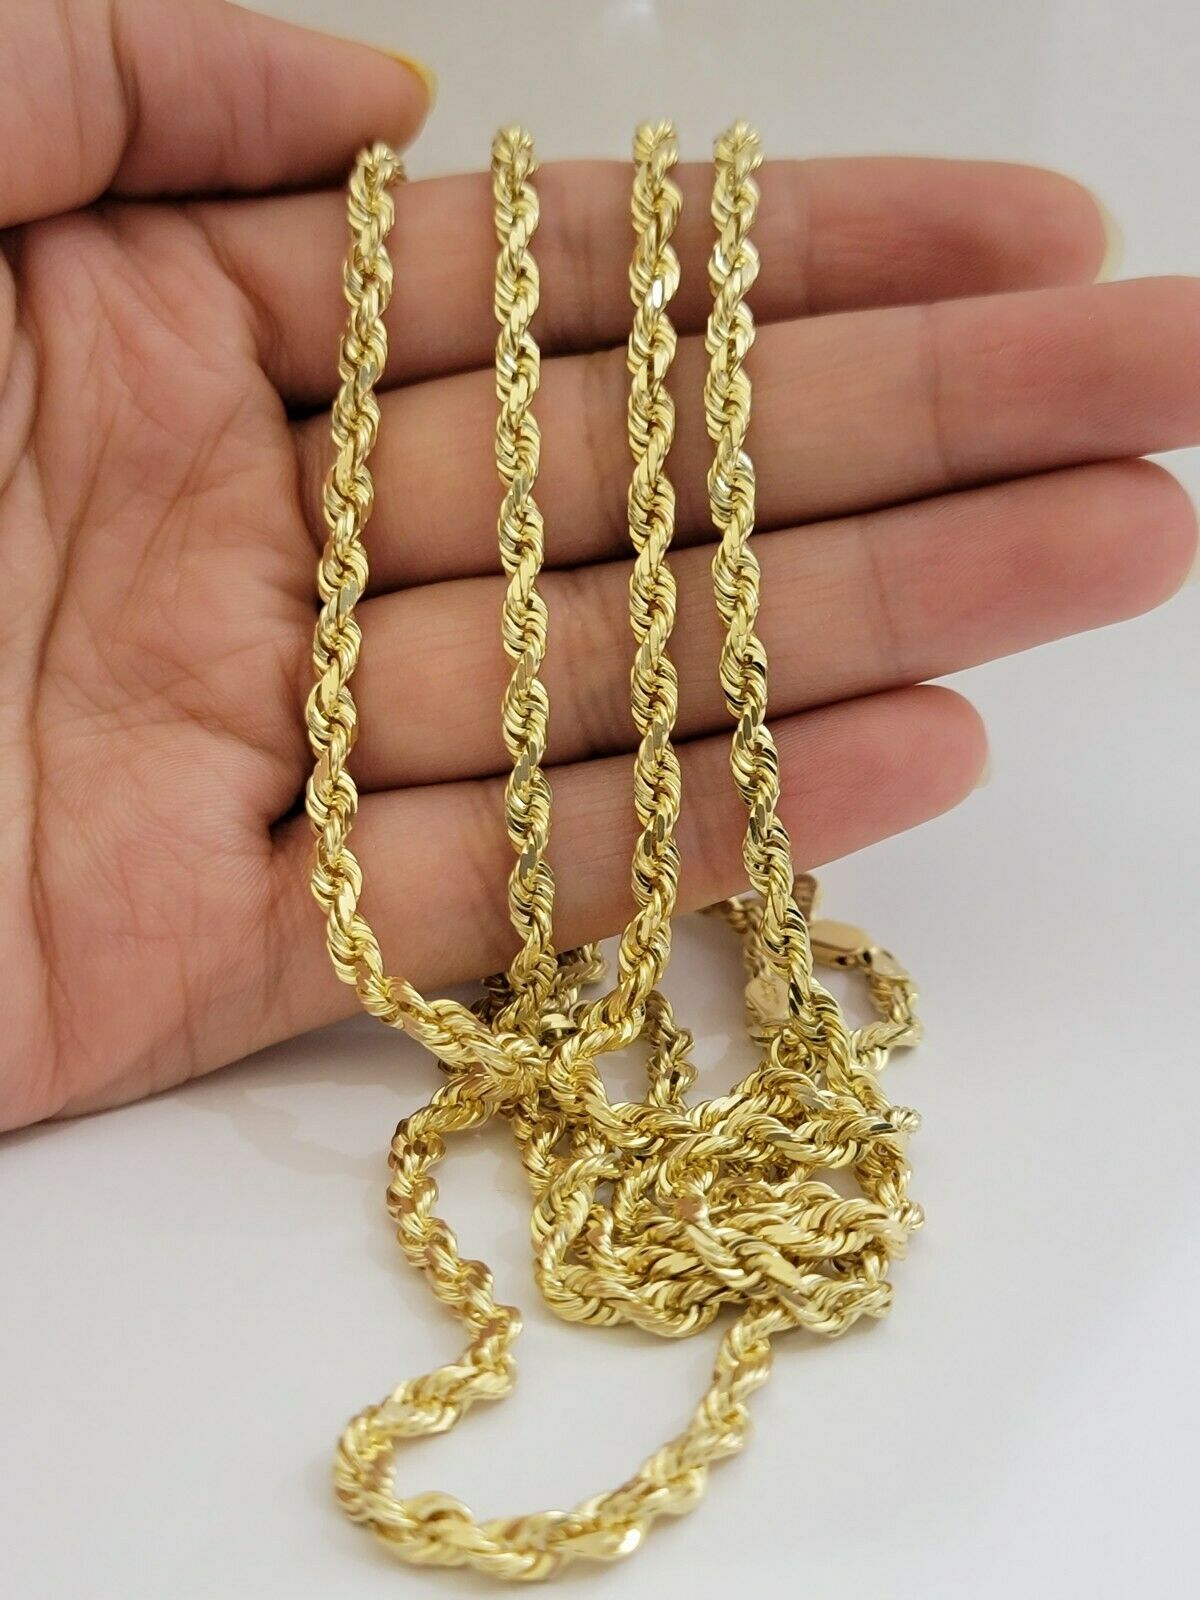 SOLID 10k Yellow Gold Rope Necklace Chain 4mm 18